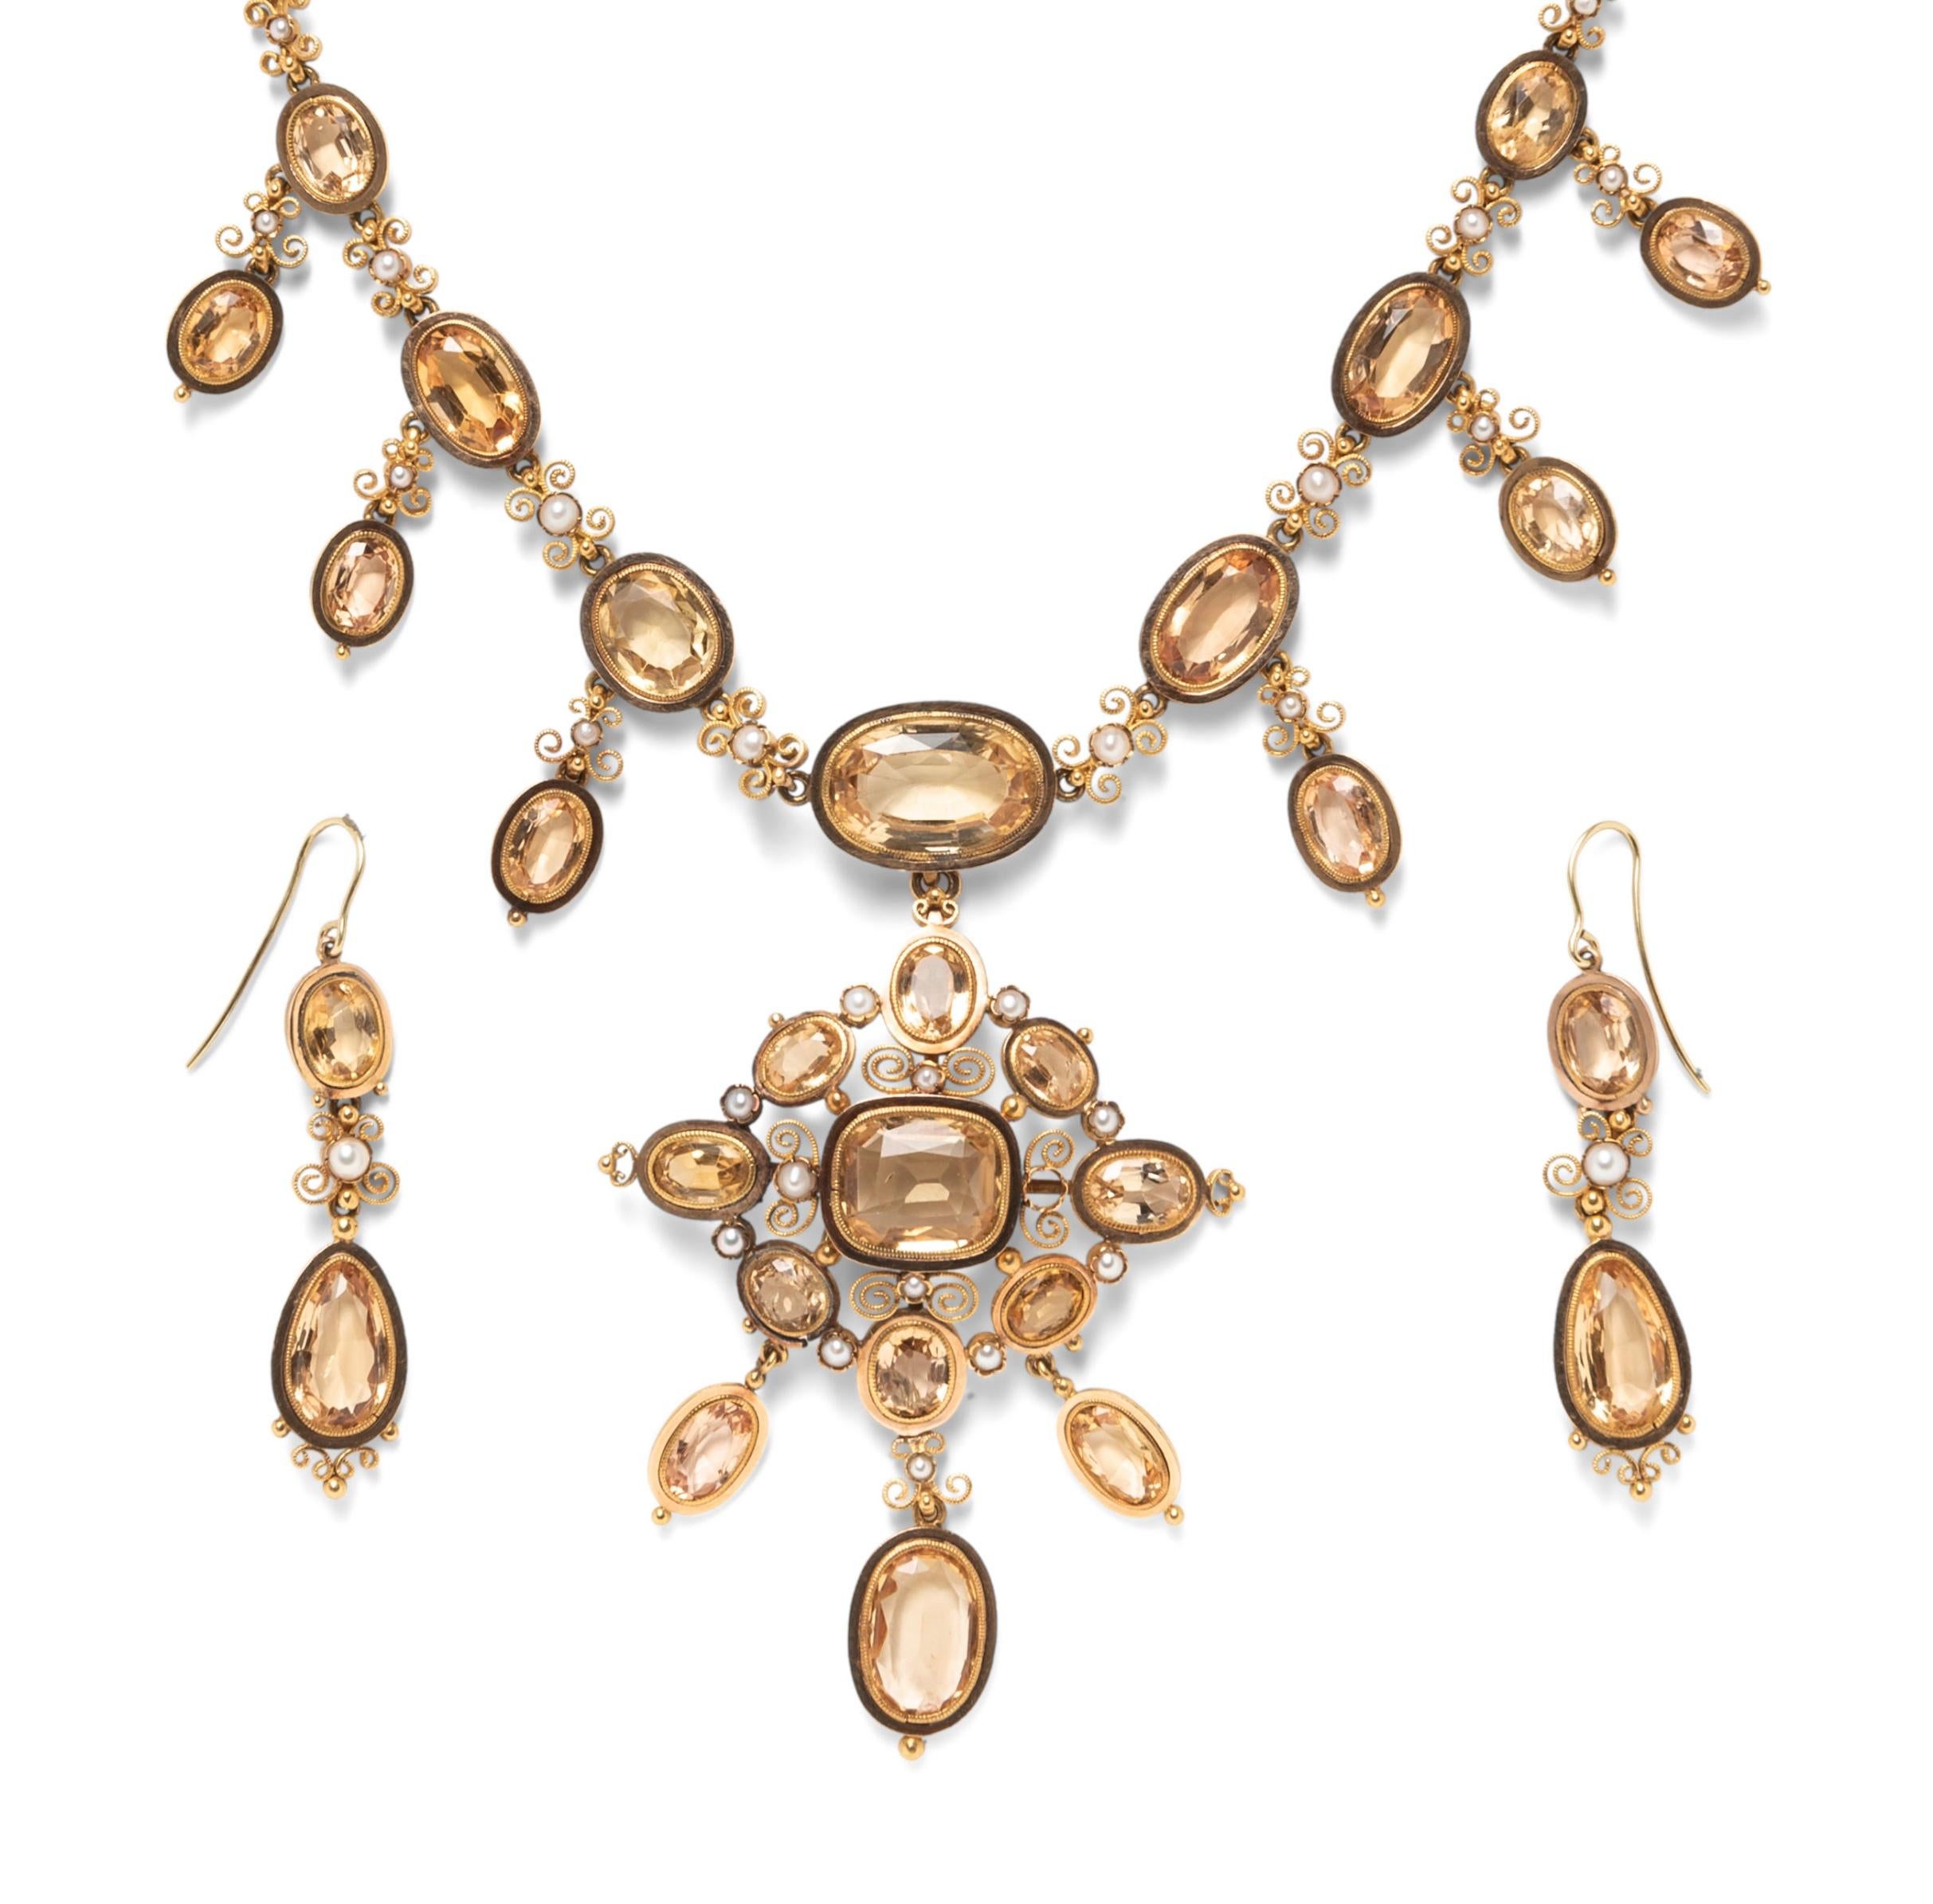 Antique gold and topaz necklace and earrings suite

Necklace with removable pendant and a pair of earrings, bezel-set with cushion and oval cut topaz, with split pearls

Necklace
Size: length 14.5 inches; pendant width 2 inches, length 2.75